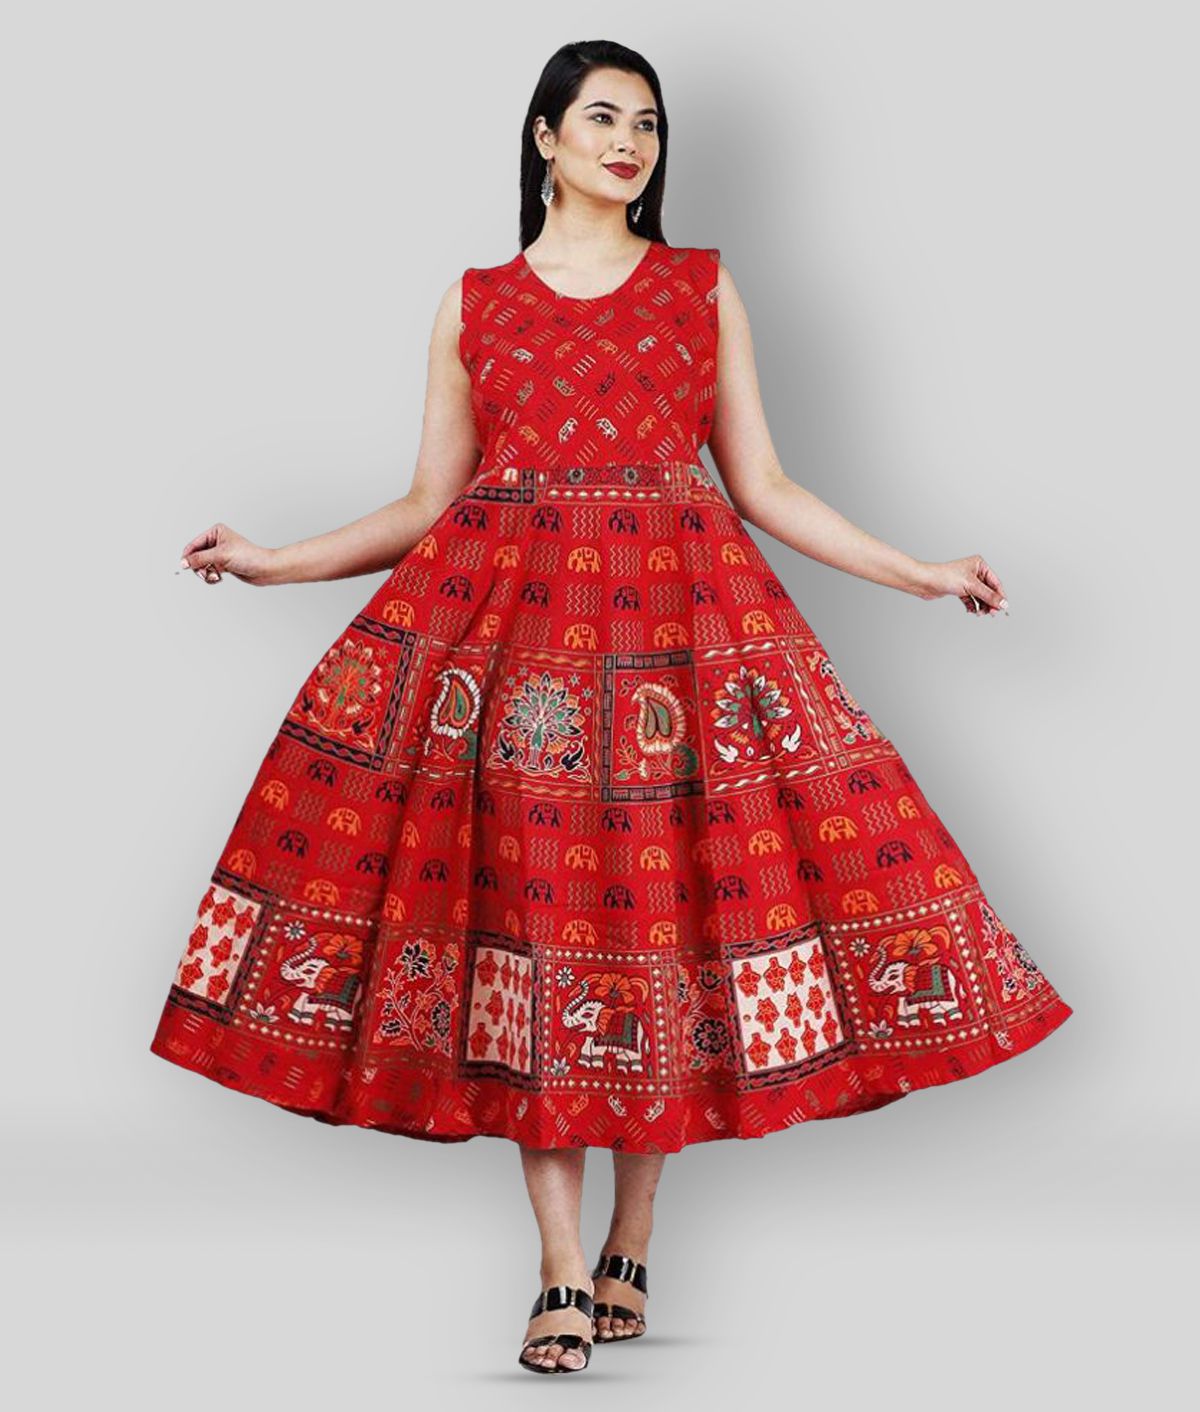     			G4Girl - Red Anarkali Cotton Women's Stitched Ethnic Gown ( Pack of 1 )